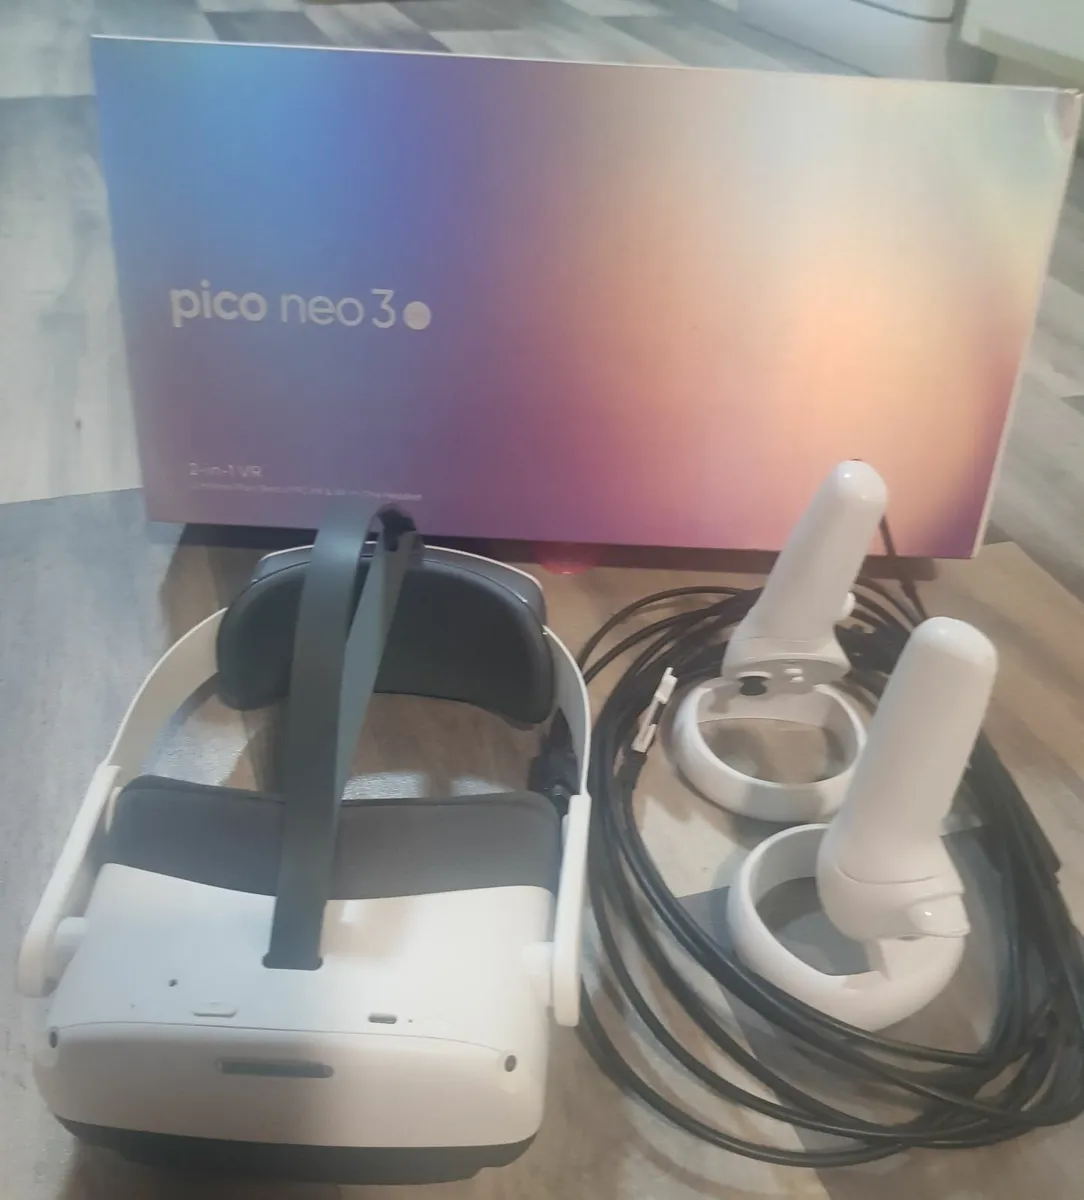 Pico Neo 3 link VR stand alone Headset 256MB